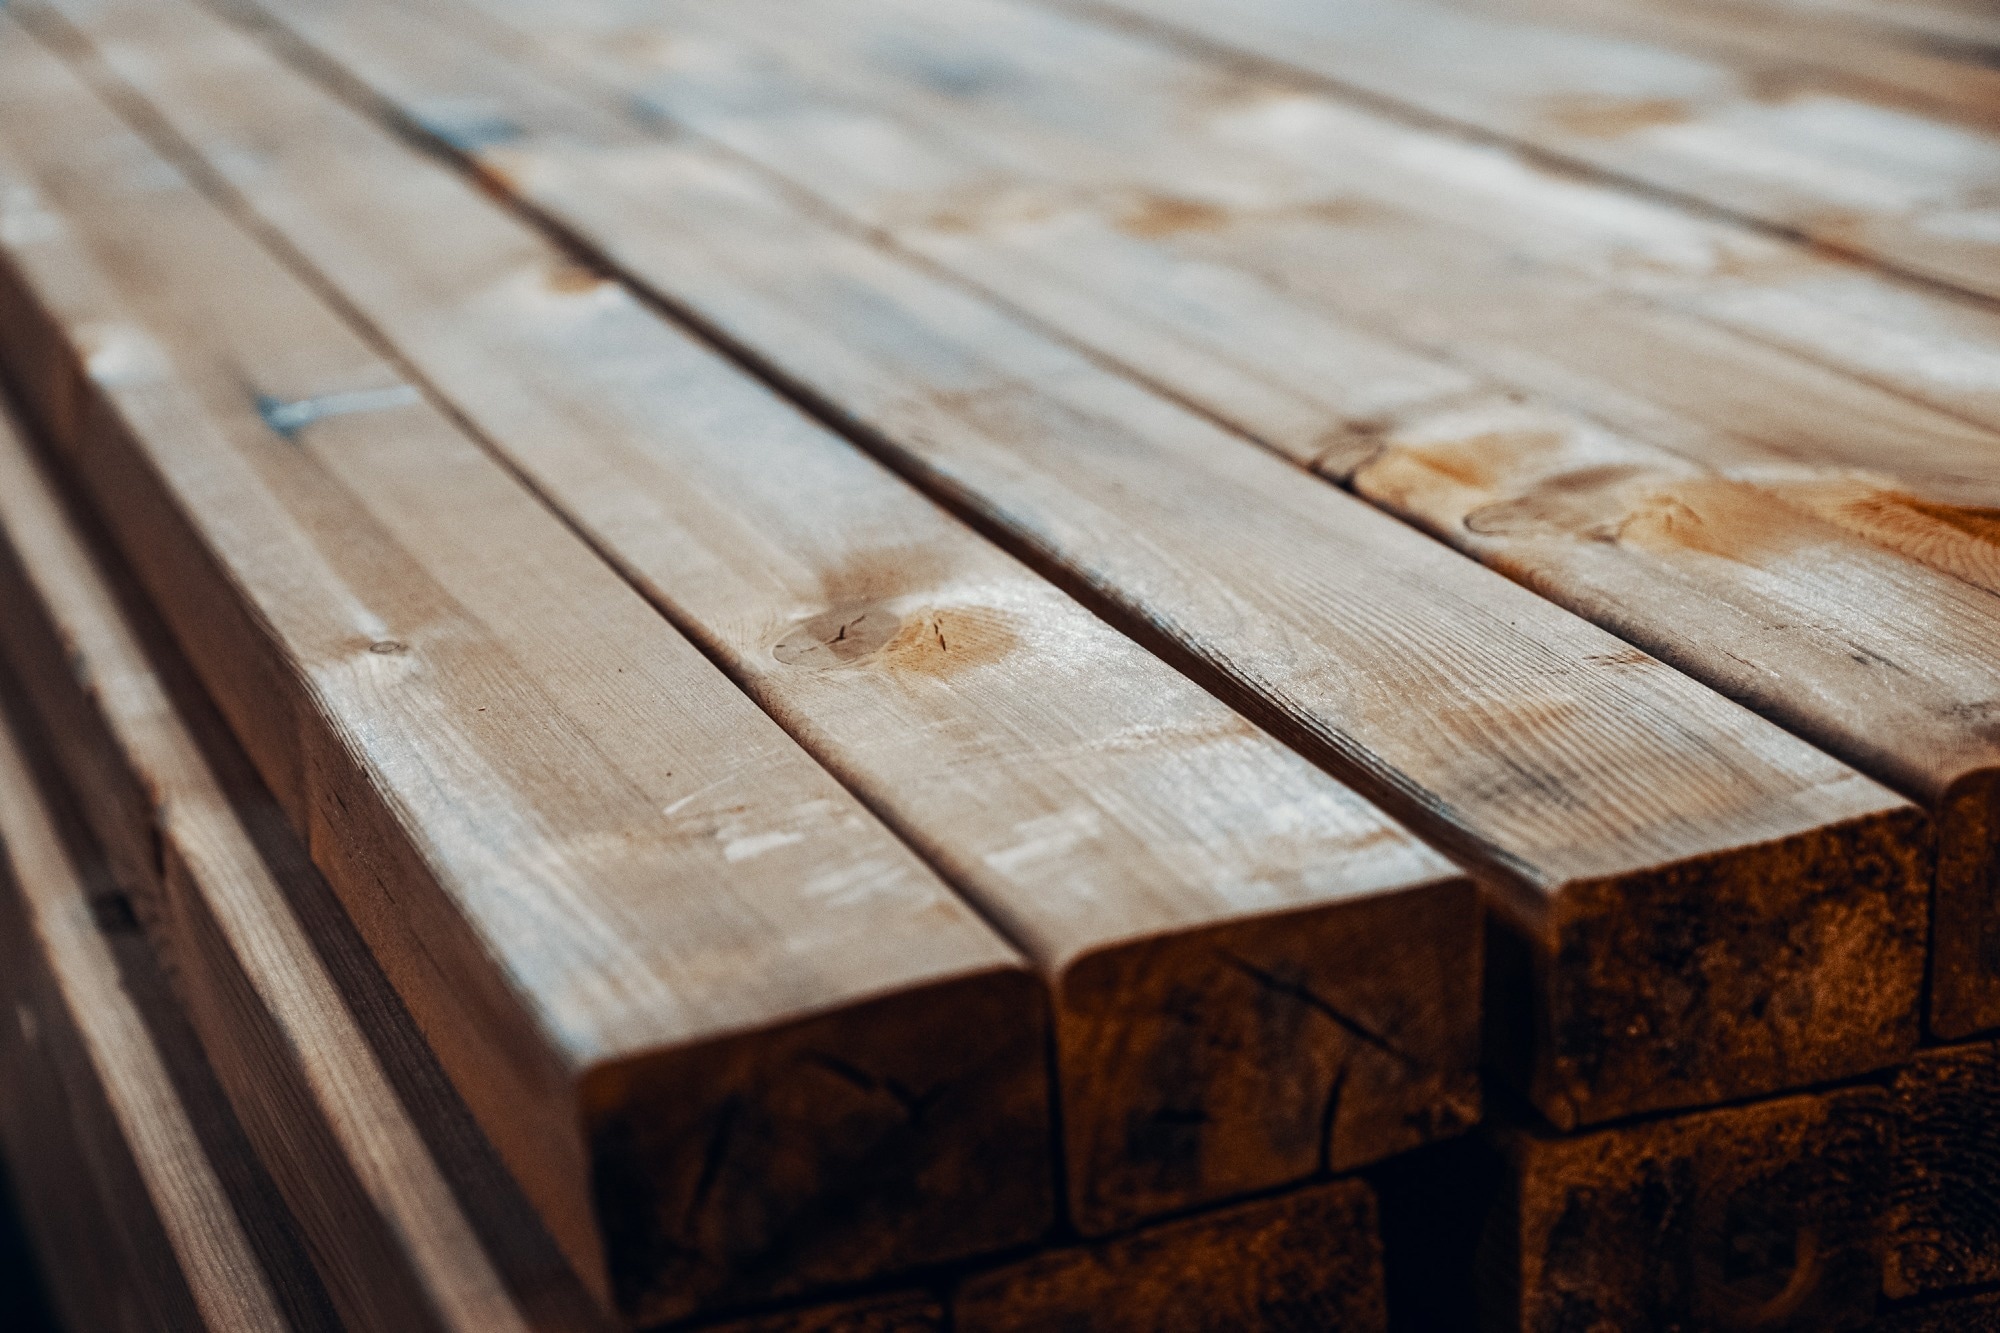 Where It All Began: How Kebony Developed a Sustainable Alternative to Tropical Hardwood